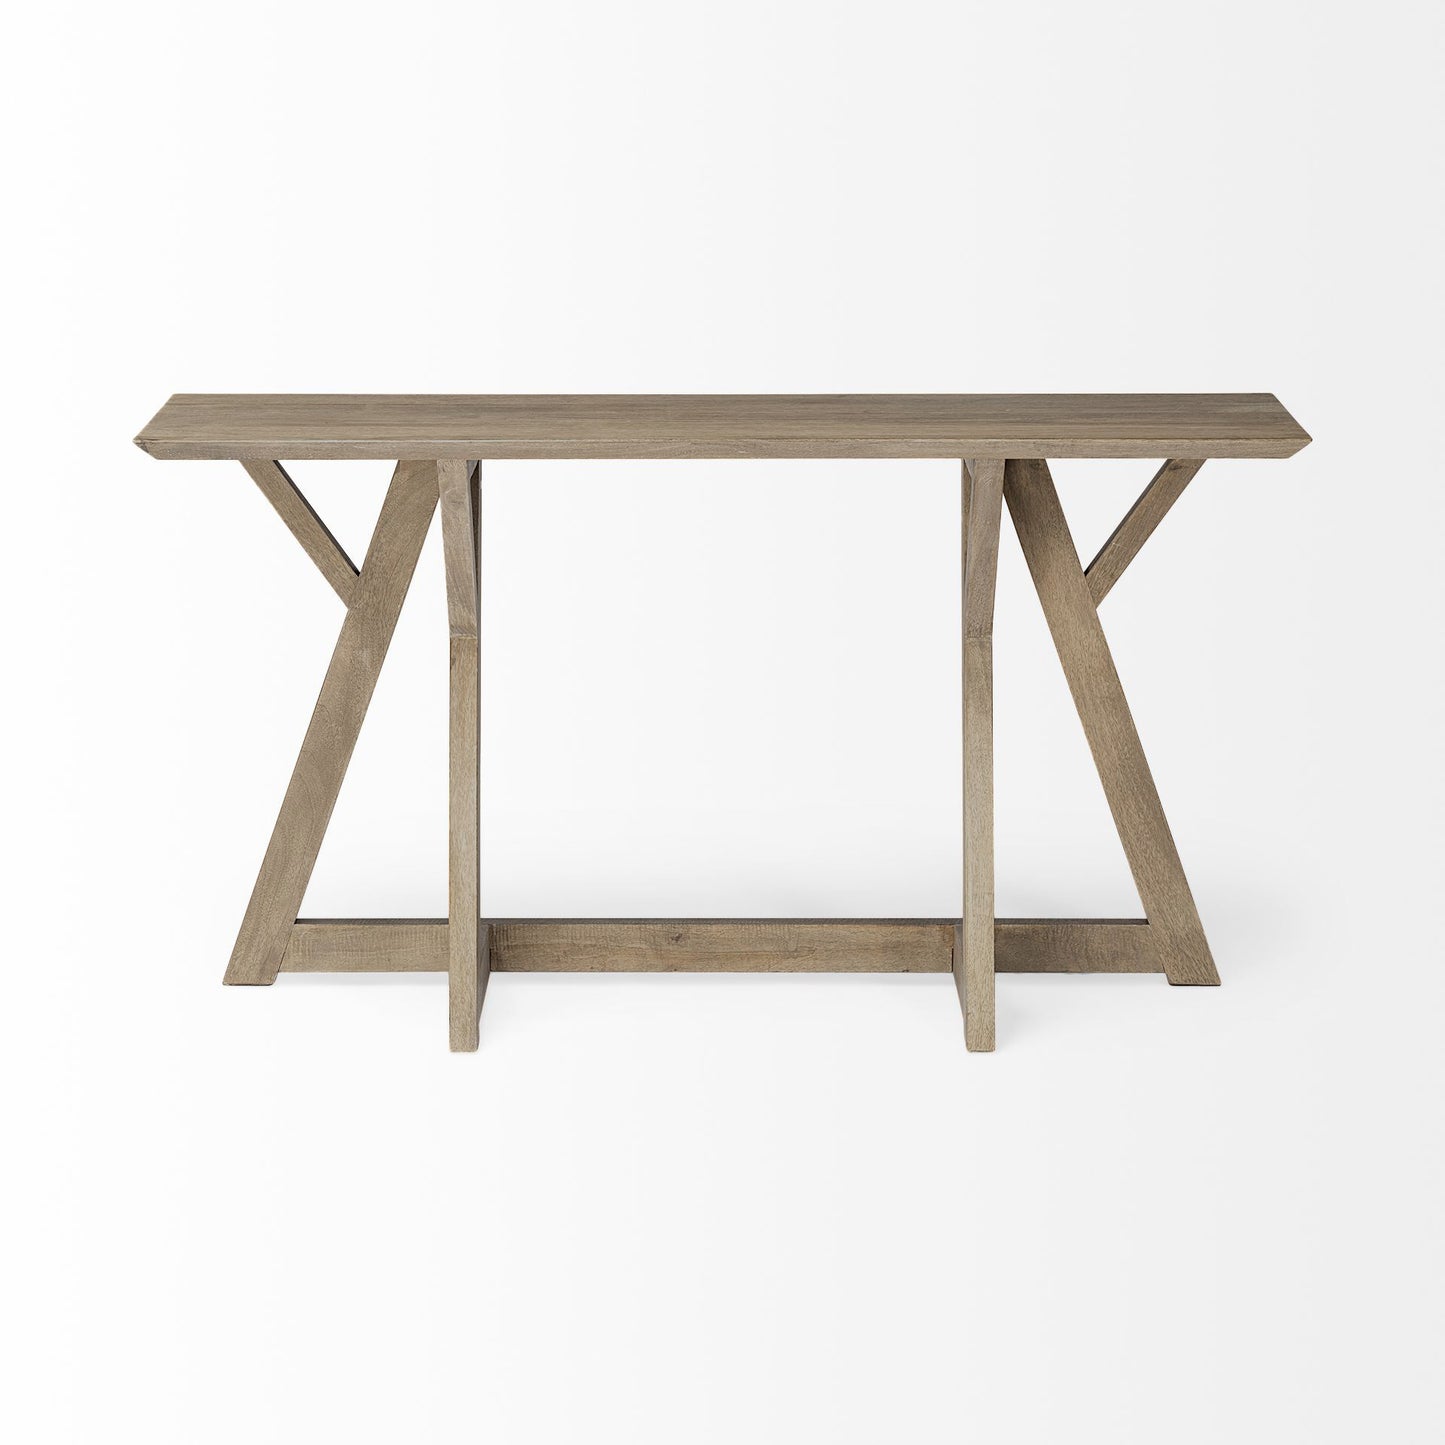 Rectangular Light Brown Mango Wood Finish Console Table With Geometrically Wooden Frame And Base By Homeroots